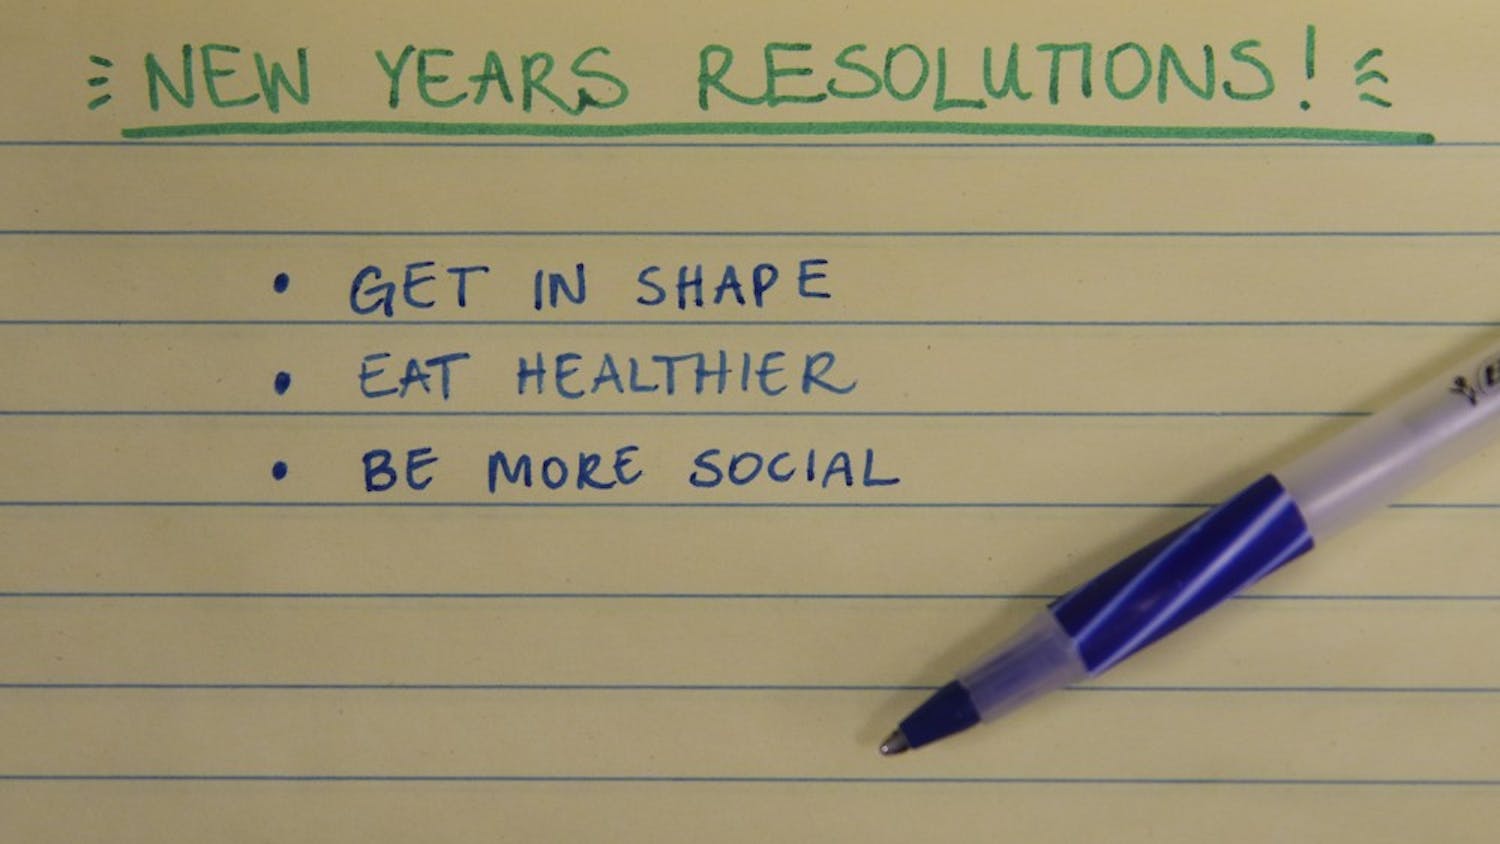 Psychologists say that support groups and visualizing your goal will help you fulfill resolutions.